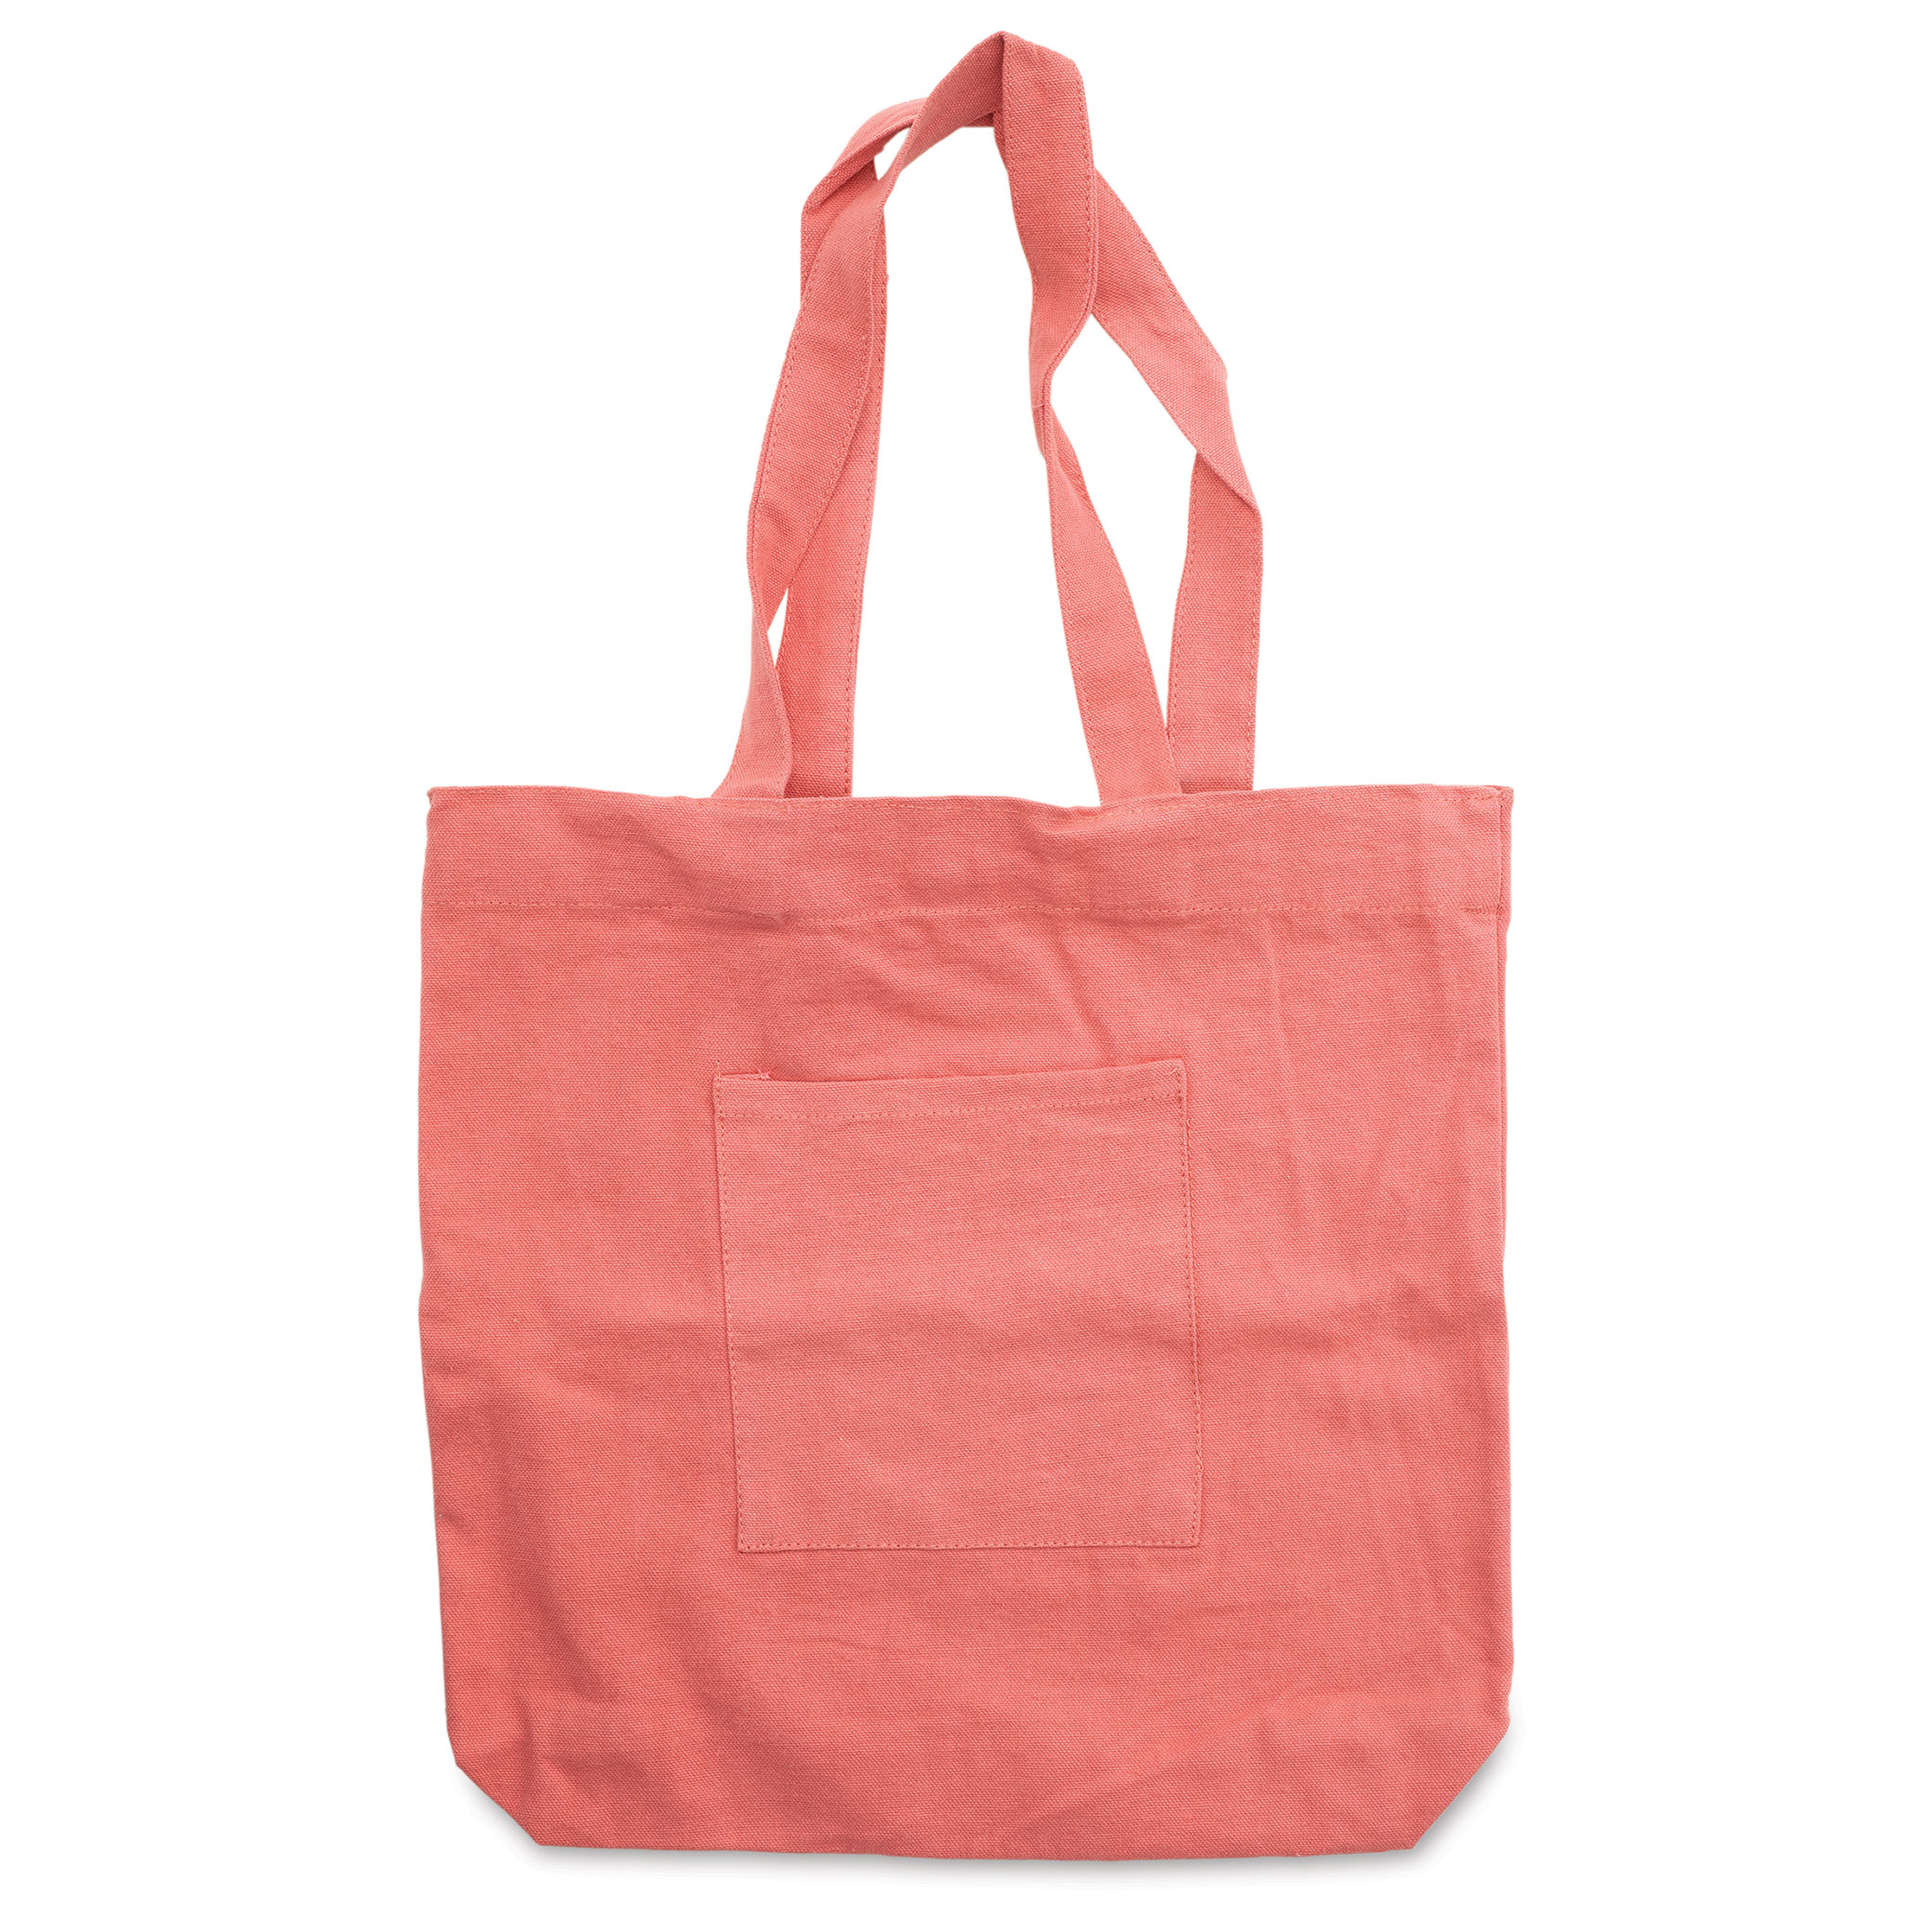 Harvest Import Washed Canvas Tote Bags | BLICK Art Materials